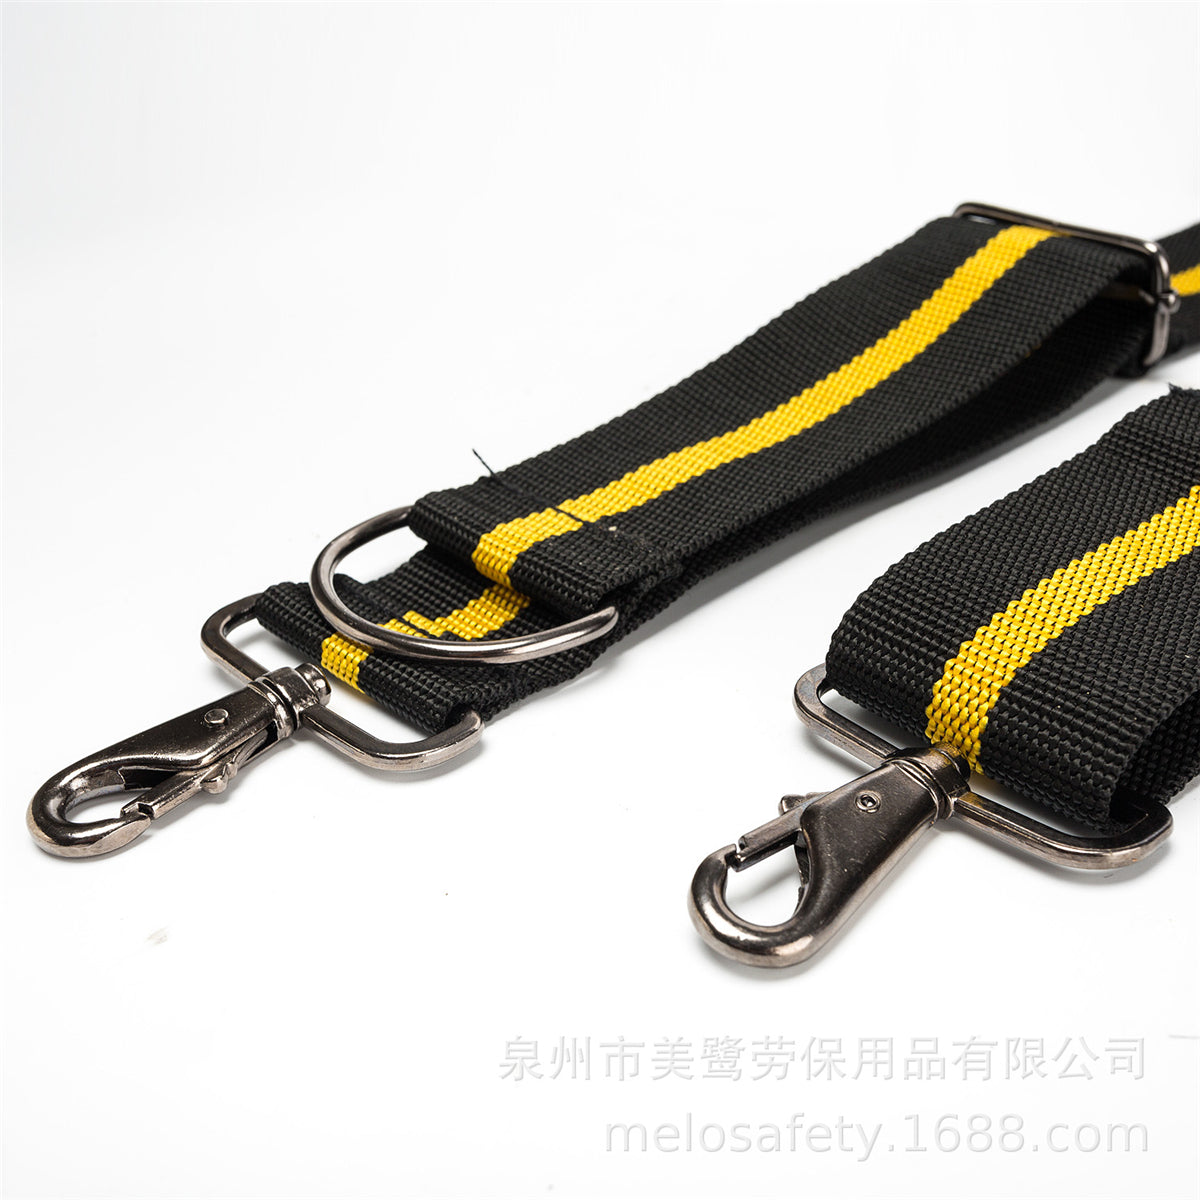 Goldenrod Adjustable Heavy Duty Work Tool Bag Belt Suspender With Mobile Phone Pouch 3 Loops